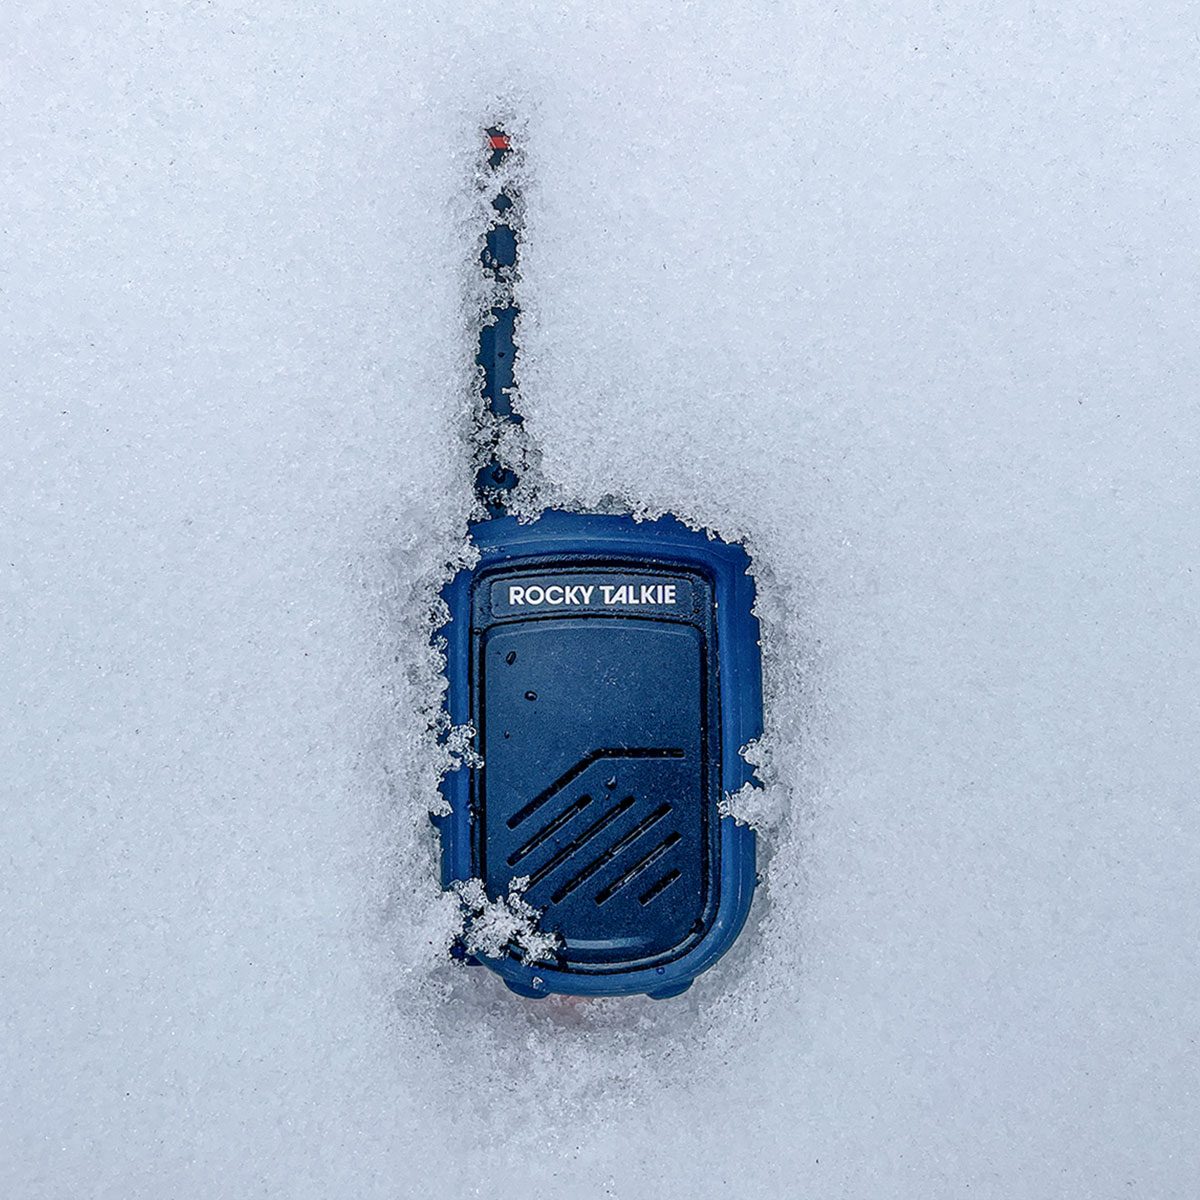 Rocky Talkie Rugged Two Way Radio in snow